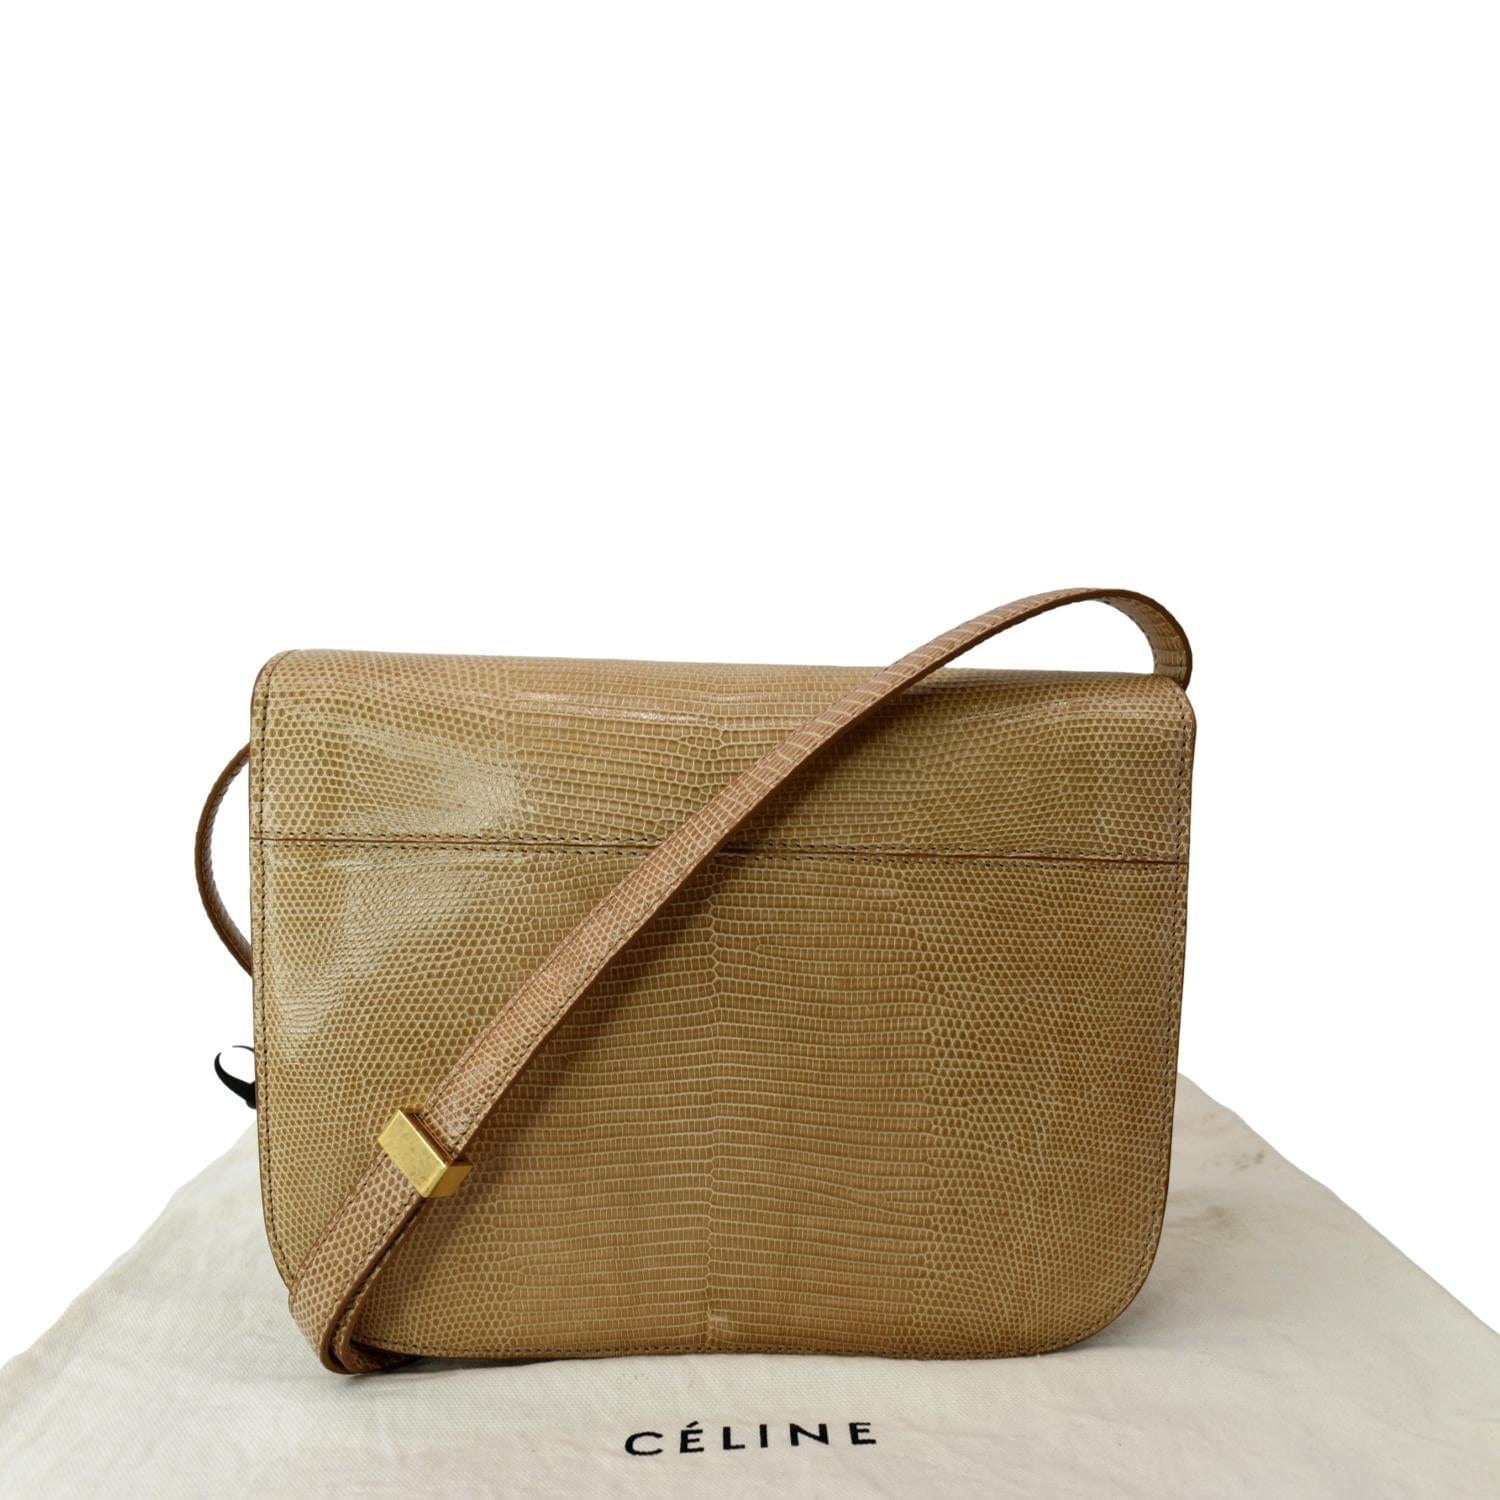 CELINE Small Bags & Handbags Leather Exterior for Women for sale